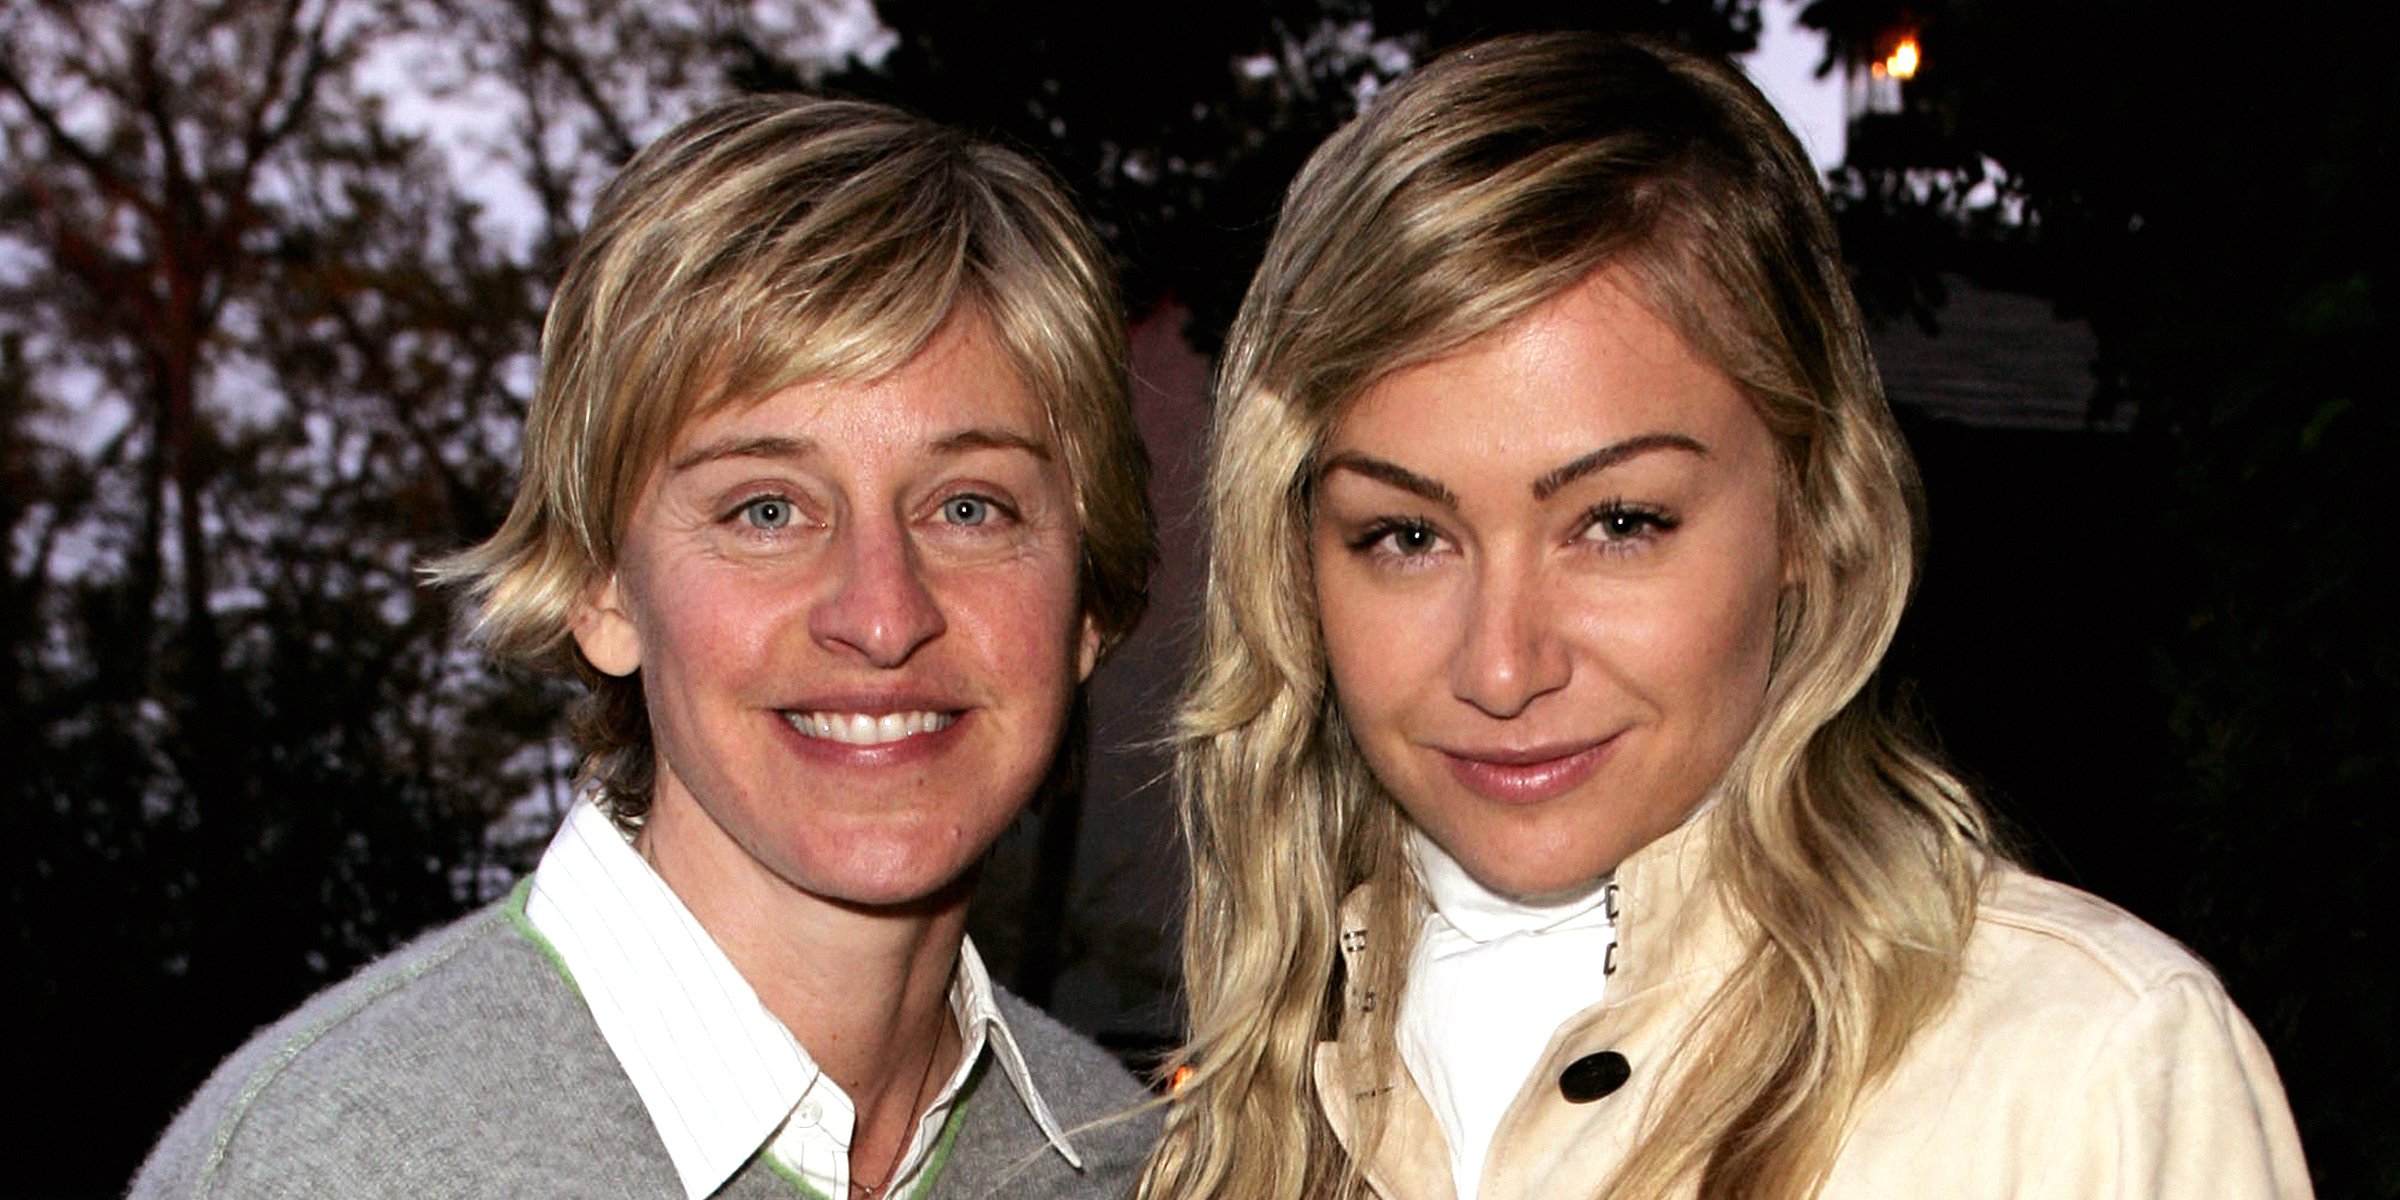 Ellen DeGeneres' Wife of 13 Years 'Didn't Want to Be a Lesbian' until She Was Charmed by the TV Host